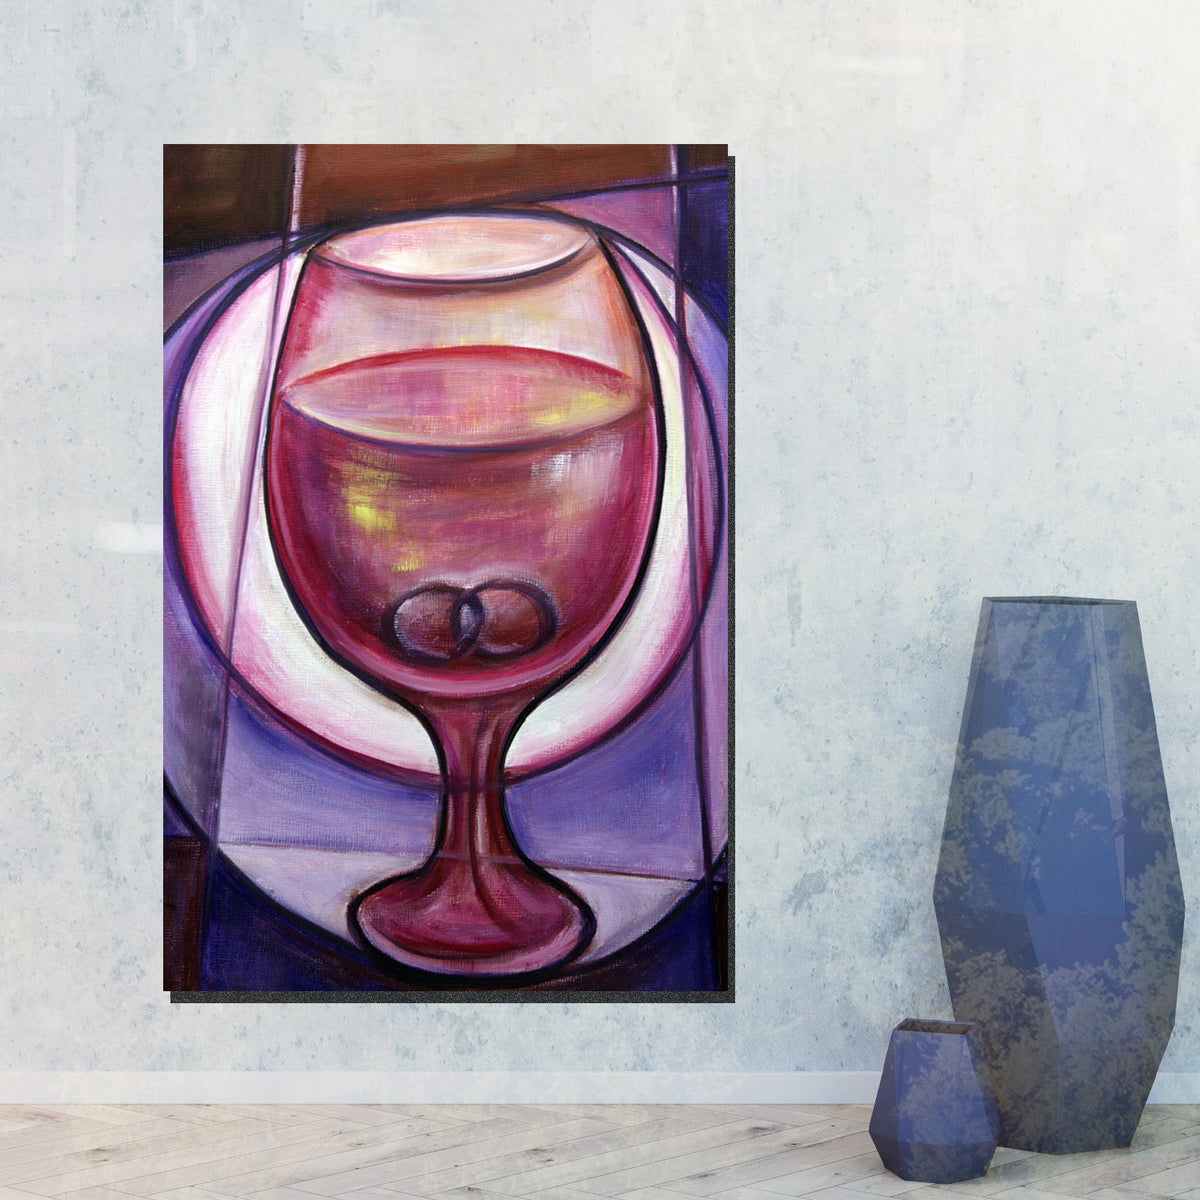 https://cdn.shopify.com/s/files/1/0387/9986/8044/products/WineglasswithtworingsCanvasArtPrintStretched-3.jpg